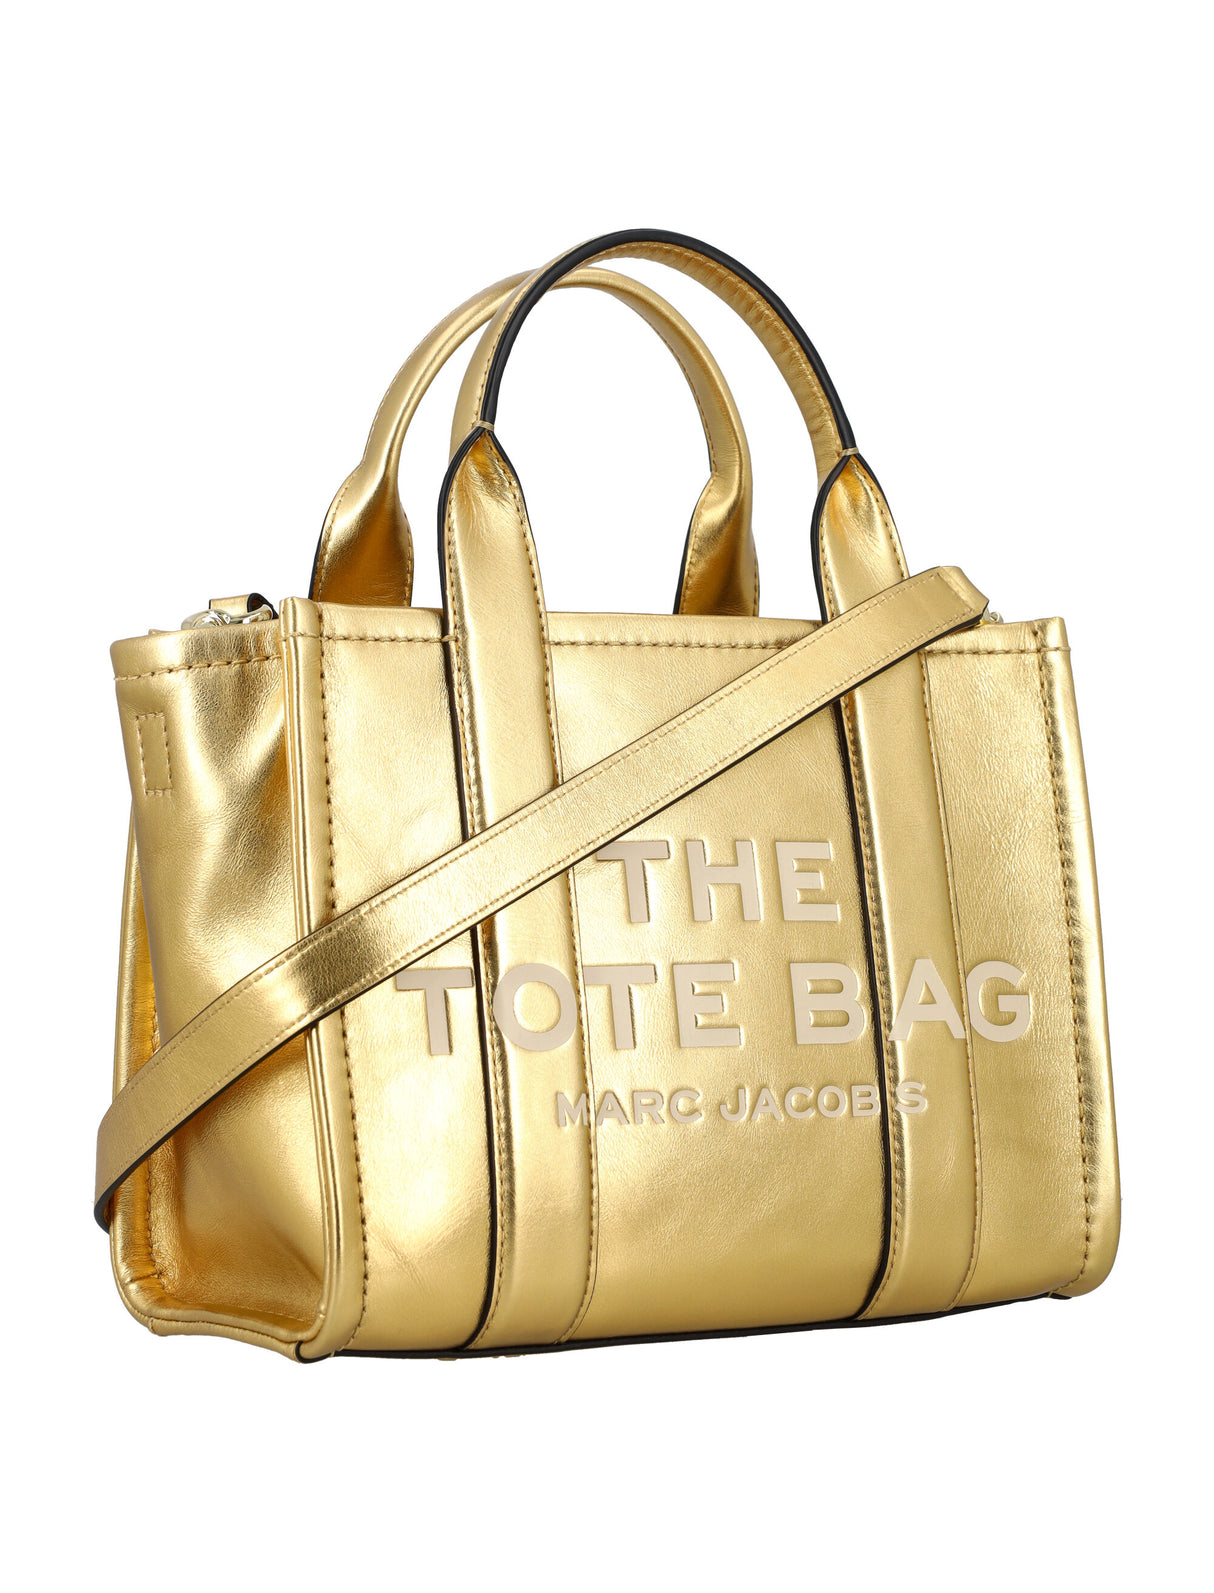 MARC JACOBS Metallic Gold Mini Tote Leather Handbag with Zip Closure and Removable Strap, 25cm x 33cm x 13cm